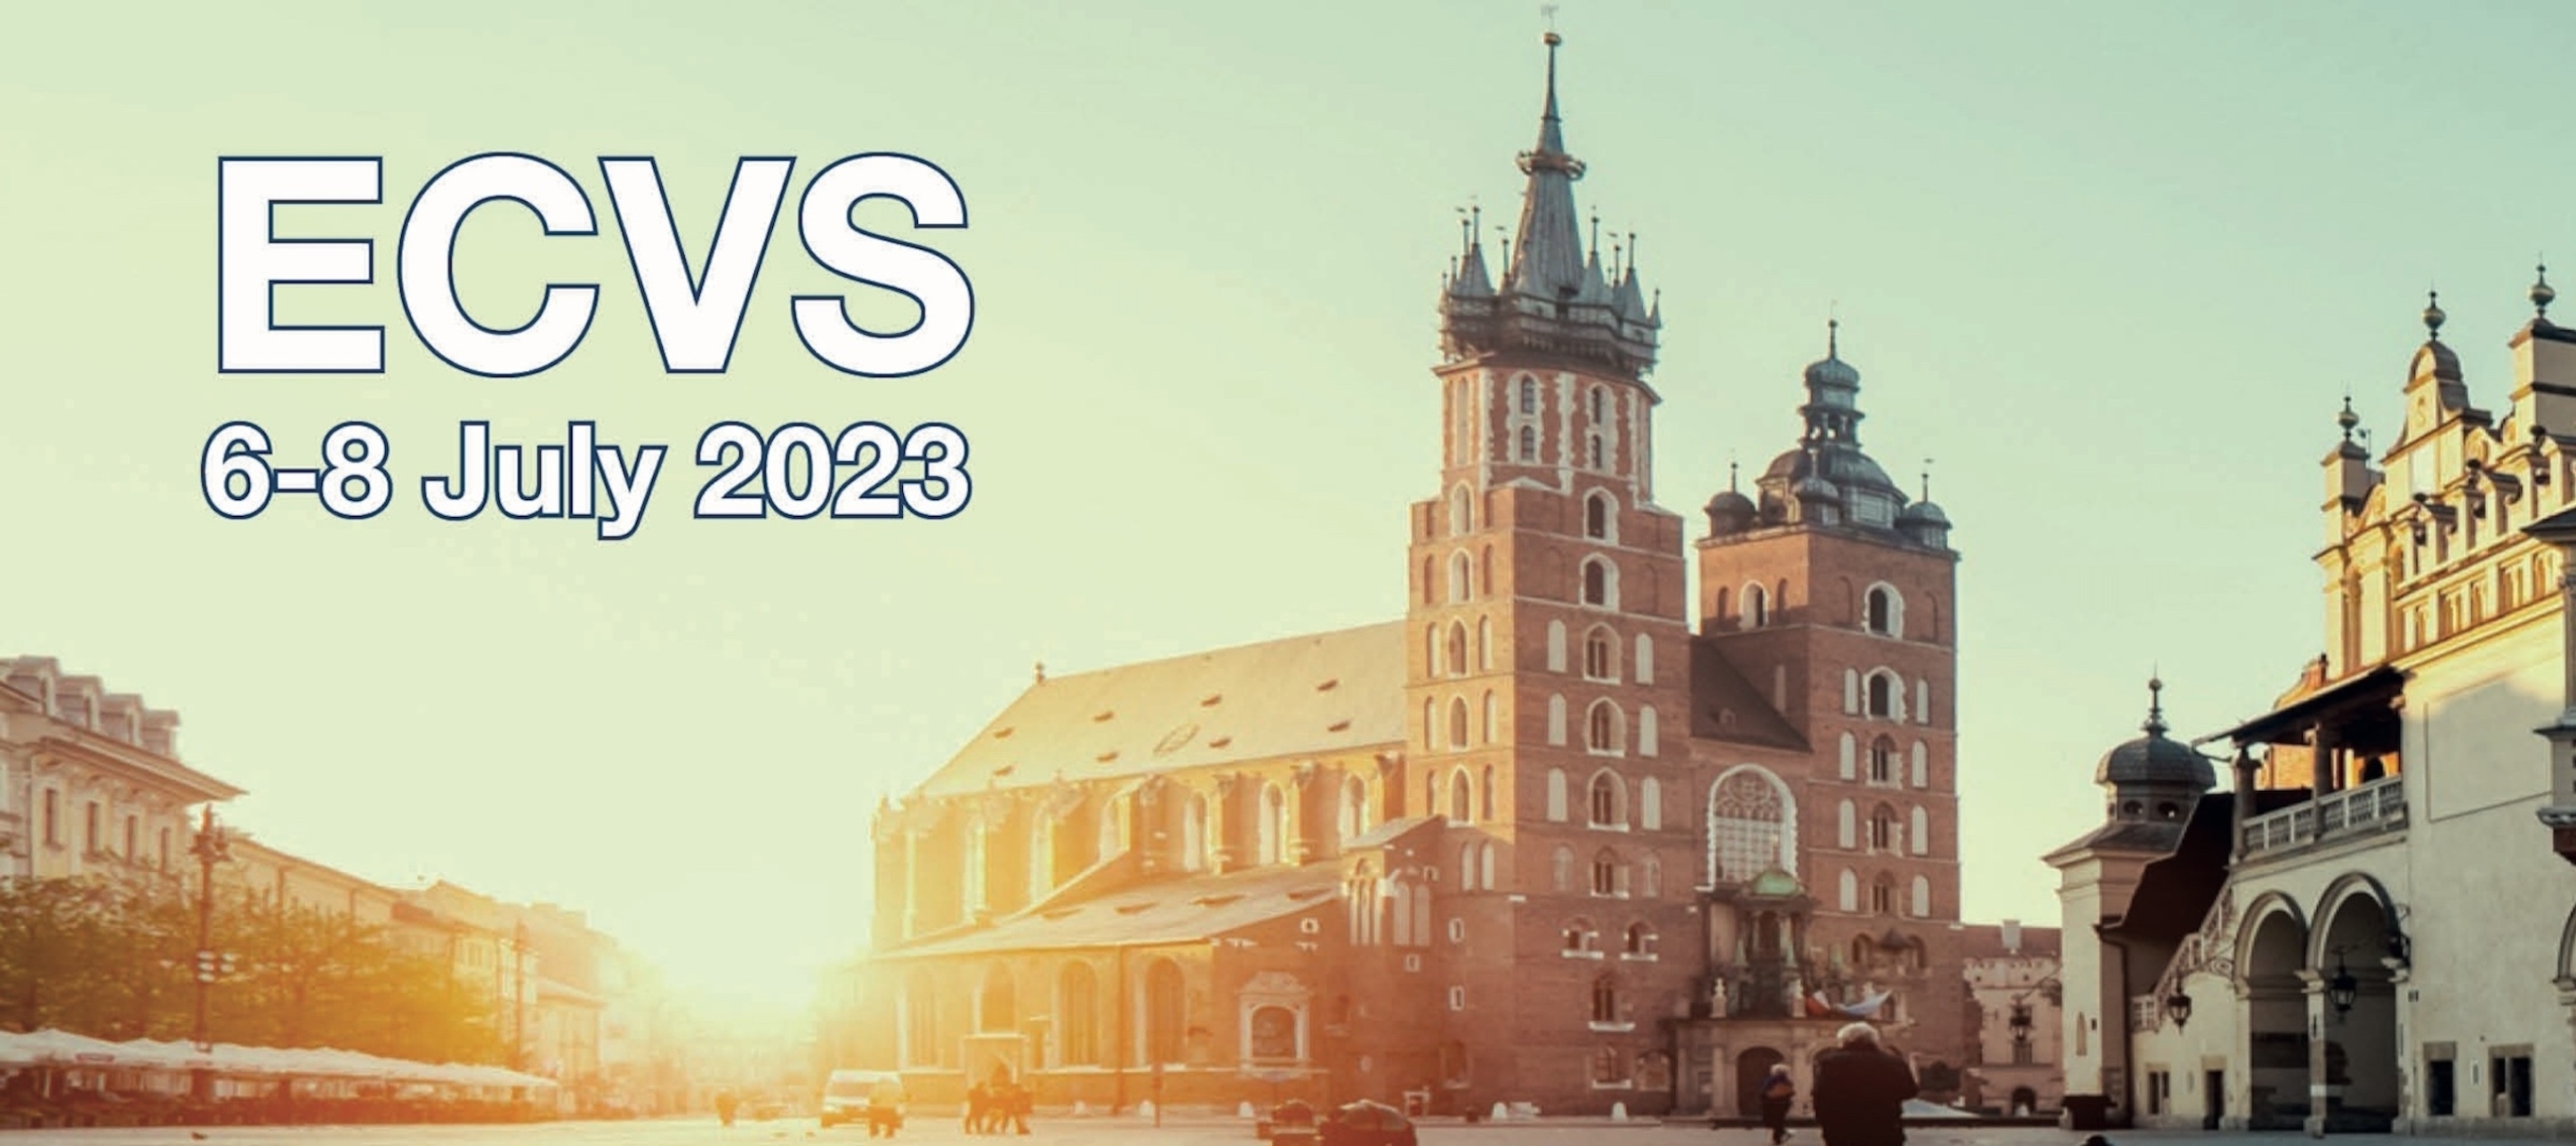 First participation in the ECVS congress - 2023